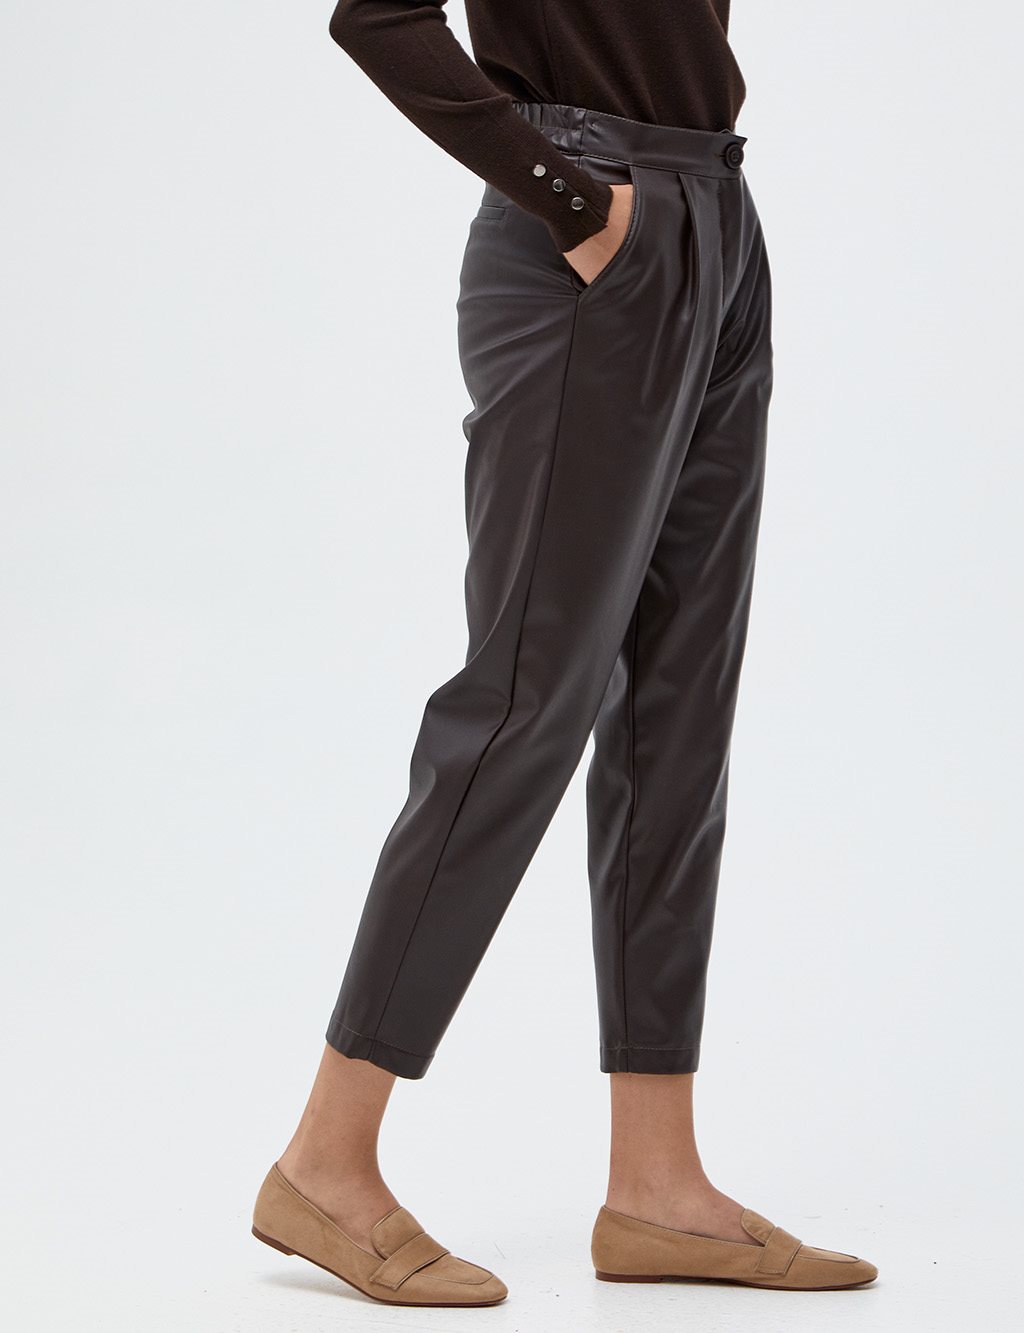 Pleated Faux Leather Pants Bitter Brown